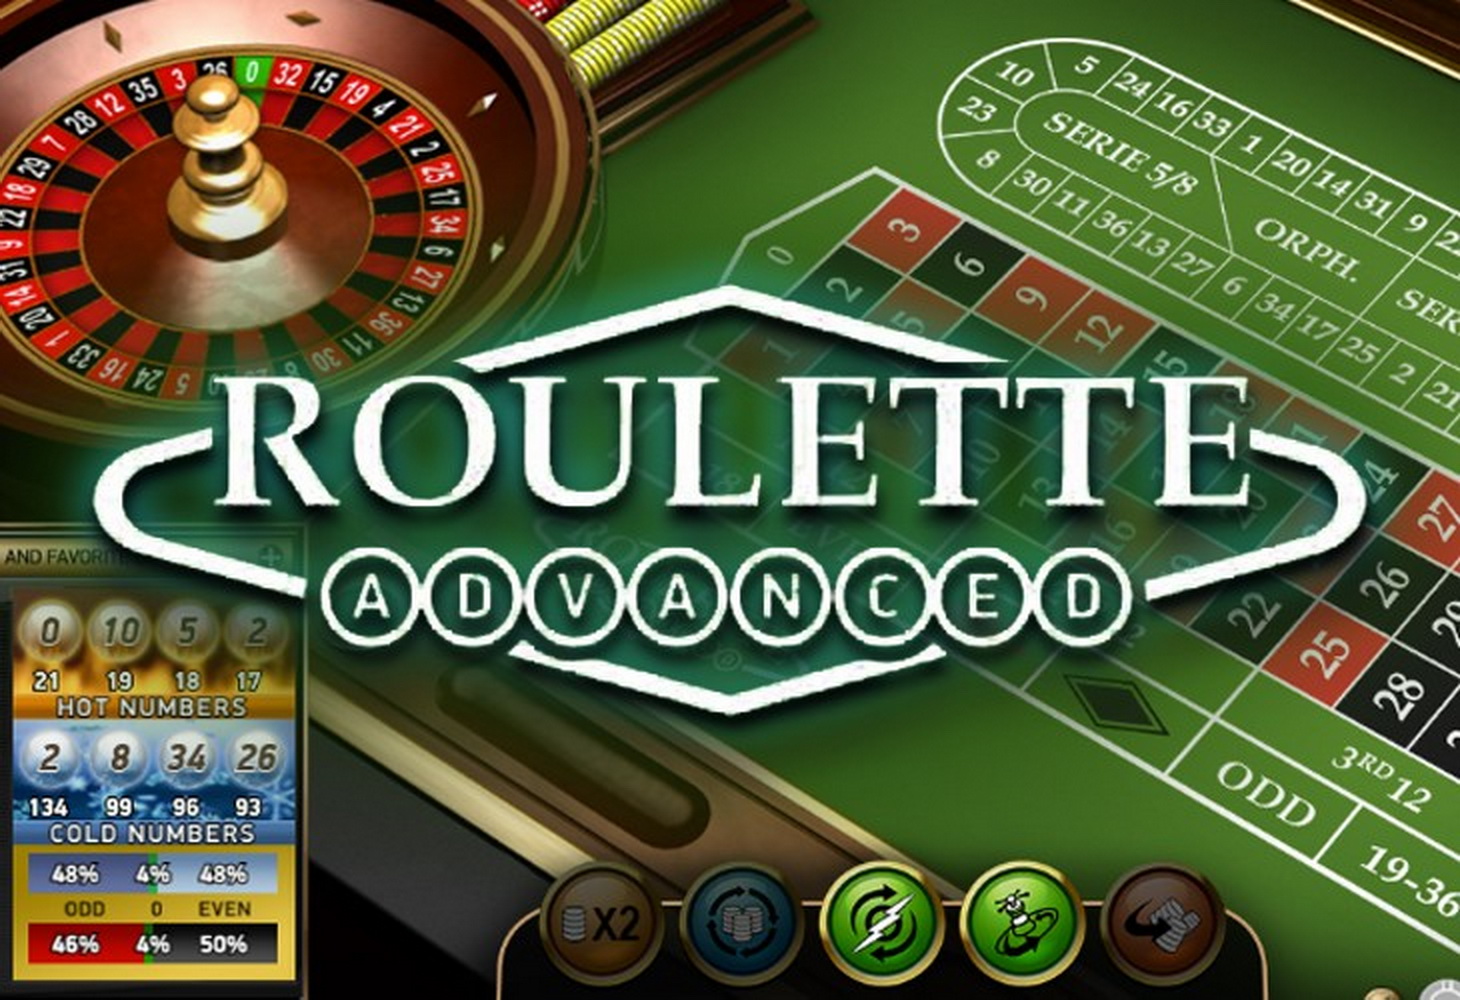 The Roulette Advanced VIP Limit Online Slot Demo Game by NetEnt